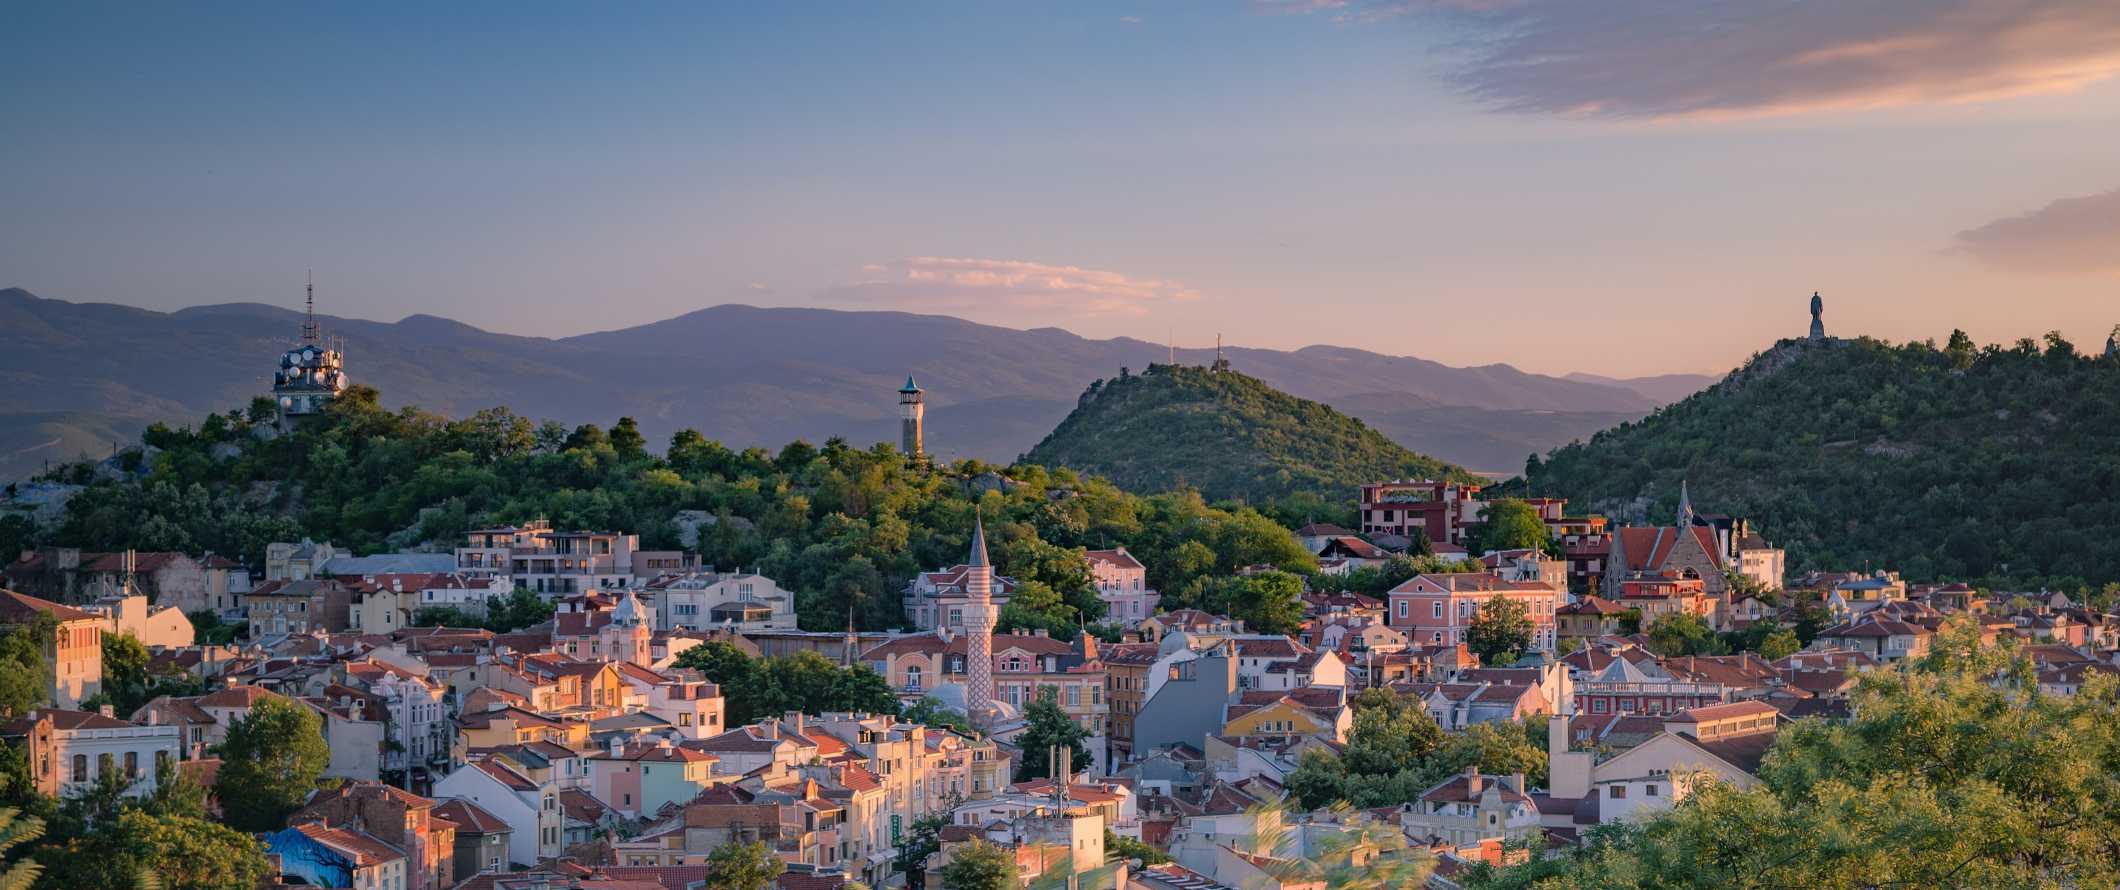 View over the rooftops of the historic center of a Plovdiv, Bulgaria